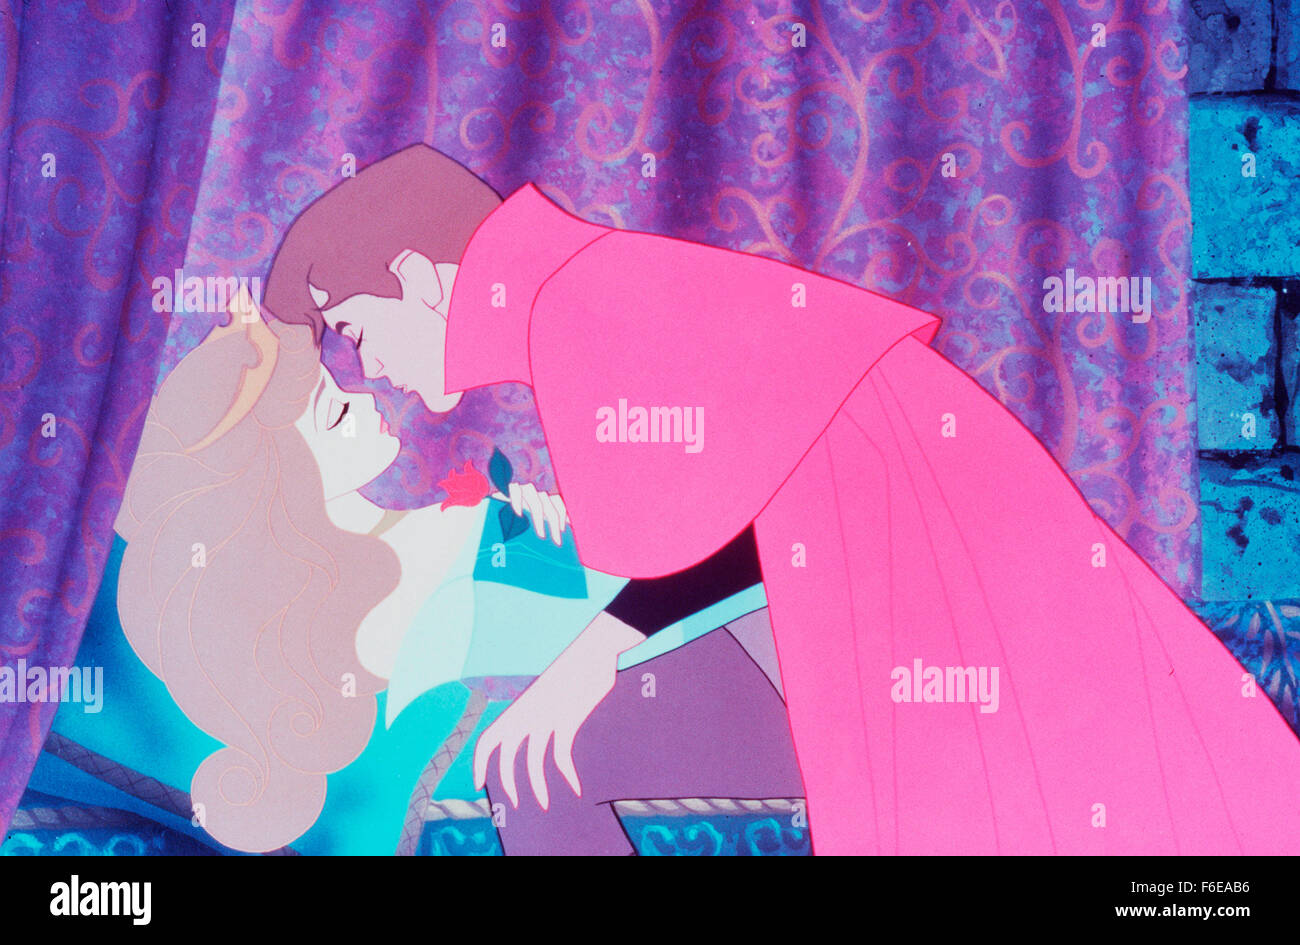 Jun 12, 1959; Burbank, CA, USA; Image from the classic animated tale 'Sleeping Beauty' with characters BRIAR ROSE/PRINCESS AURORA and PRINCE PHILLIP. Stock Photo